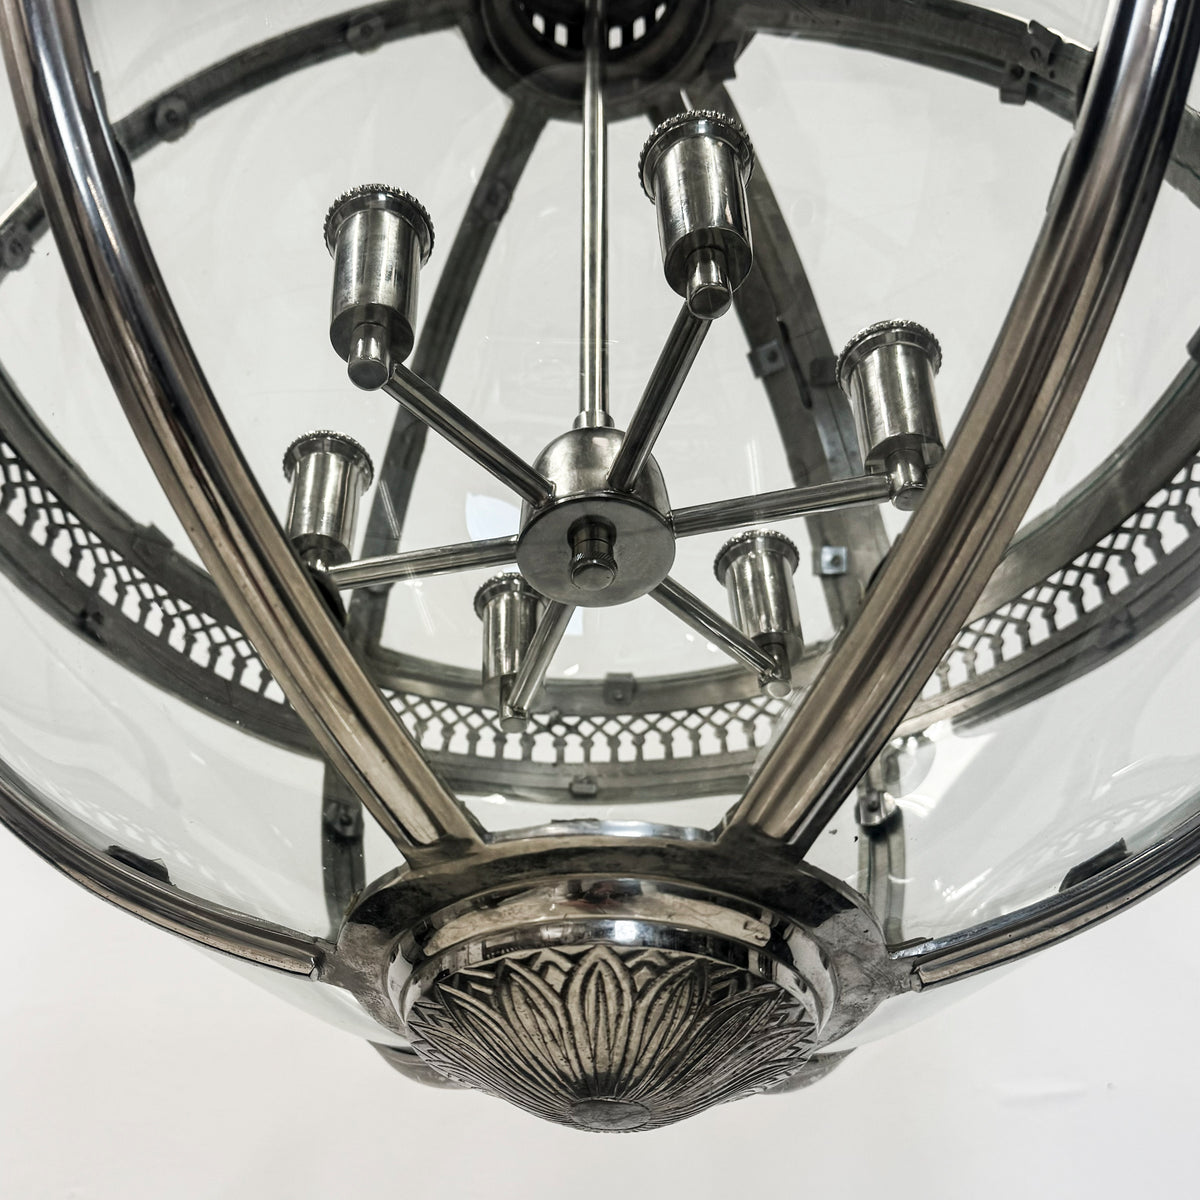 Antique Polished Steel Sphere Globe Pendant Light | The Architectural Forum